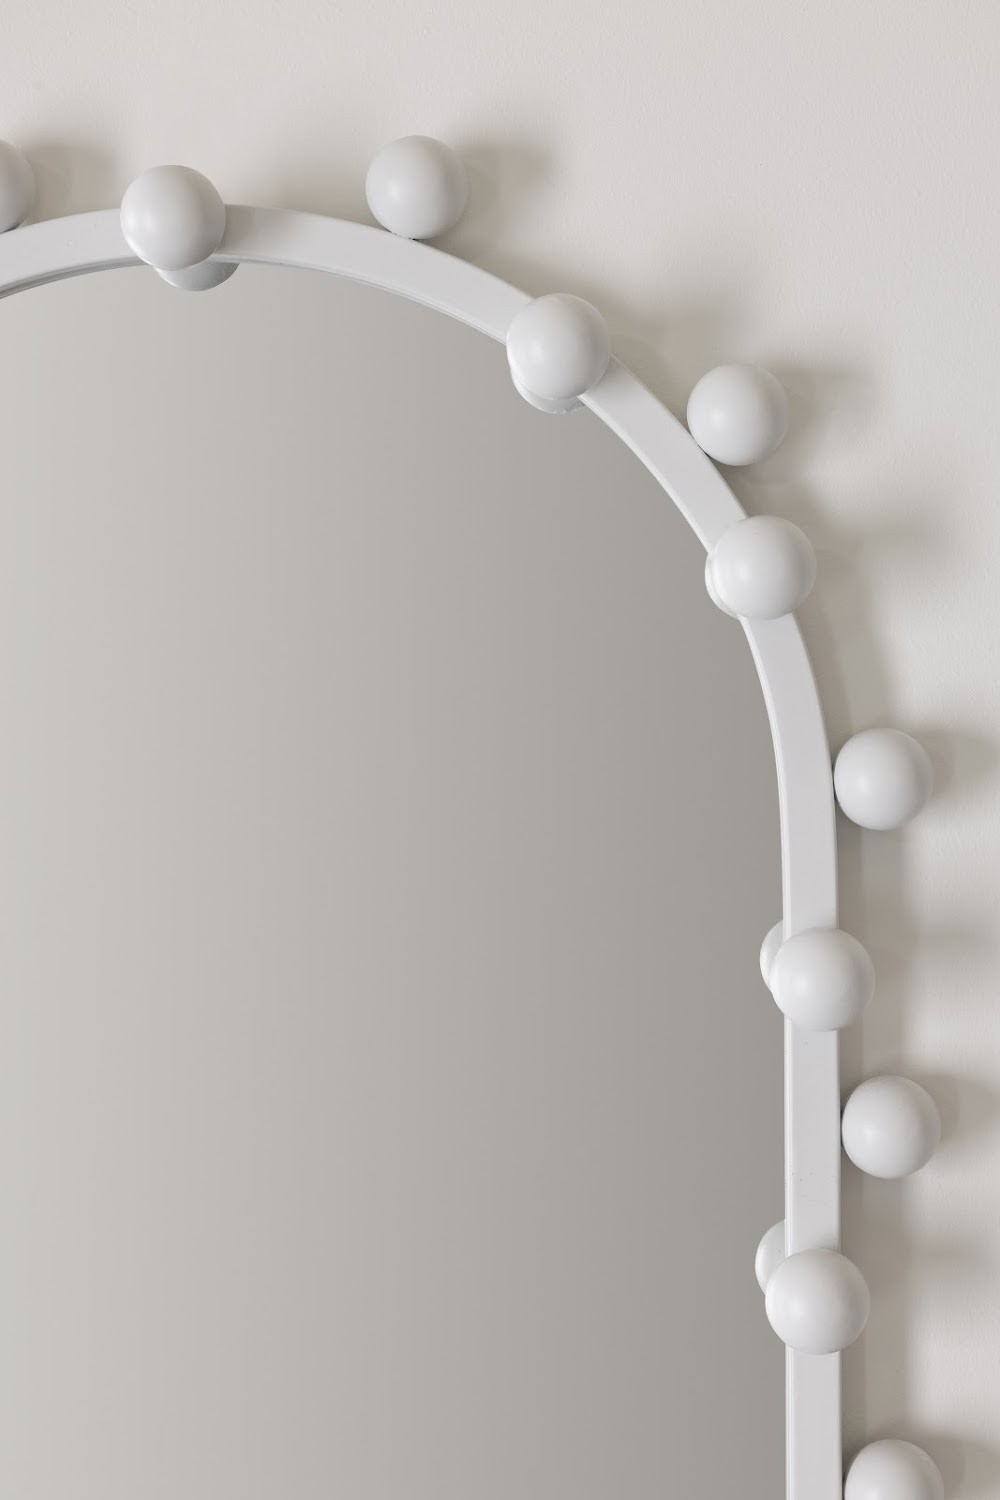 a mirror that has some balls on it